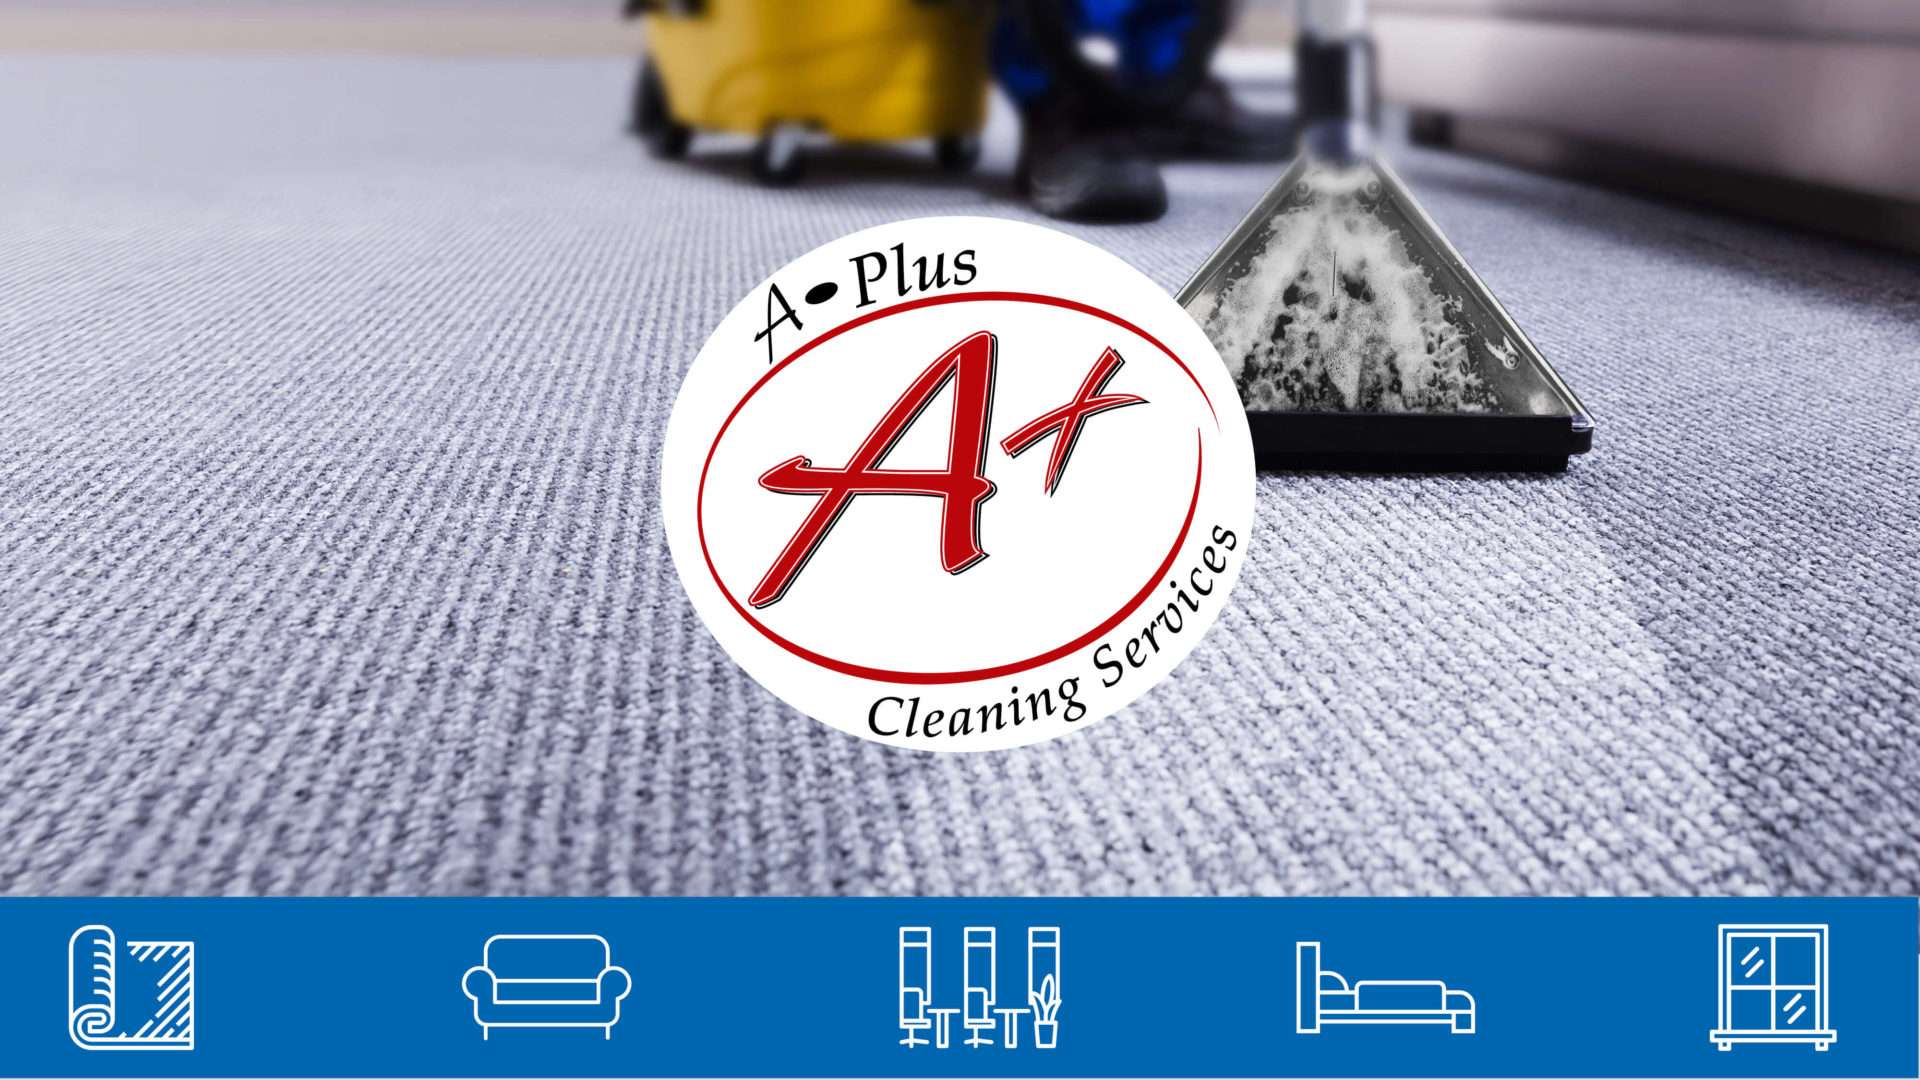 Chicago Area Best Cleaning Service: A-Plus Cleaning Services